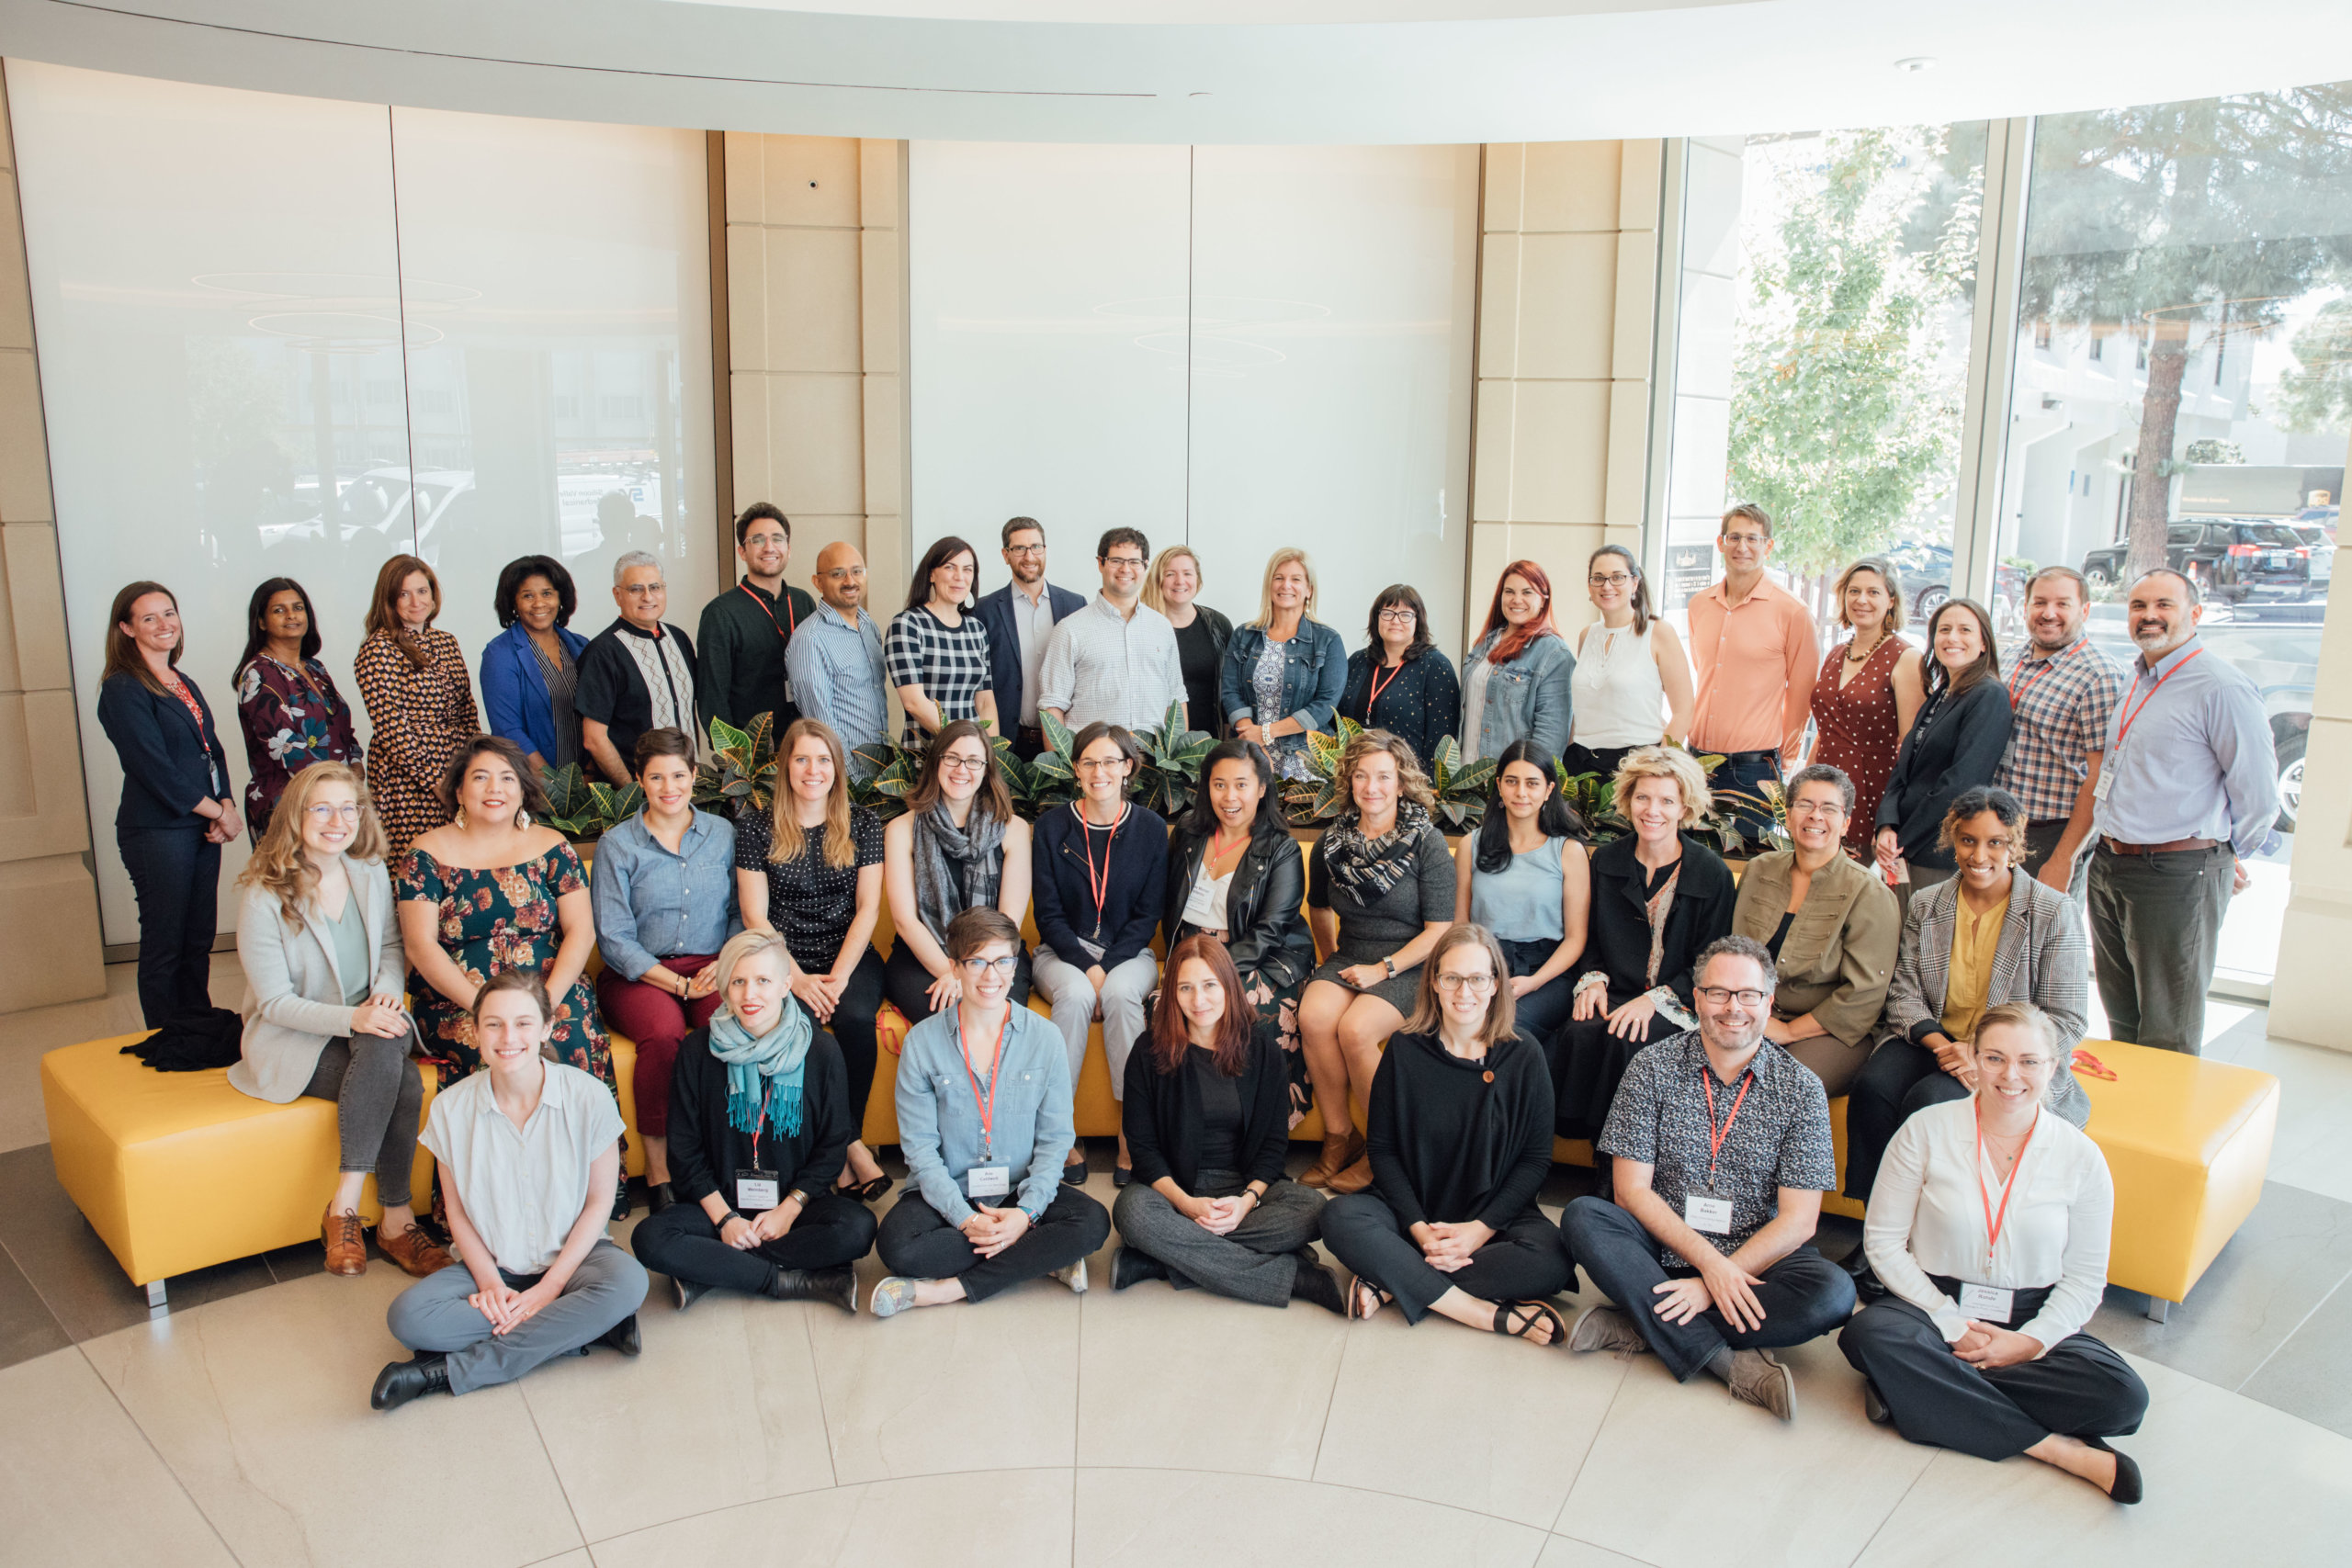 Thirty-nine diverse professionals from across the field of science communication training gathered for this event.